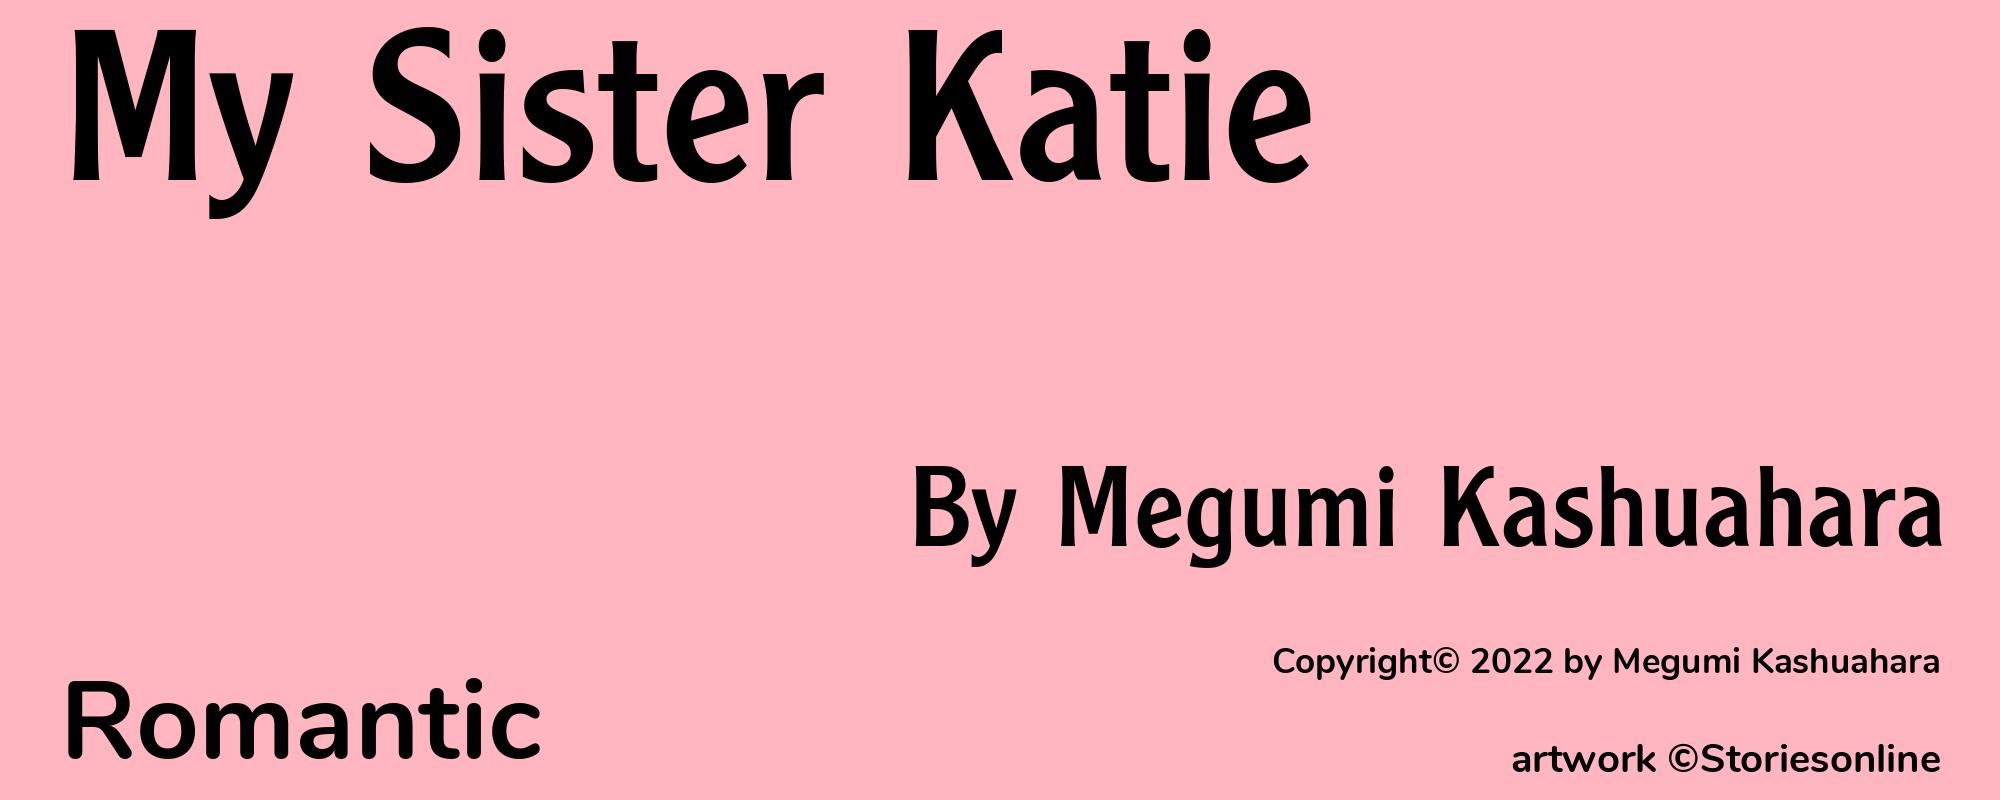 My Sister Katie - Cover